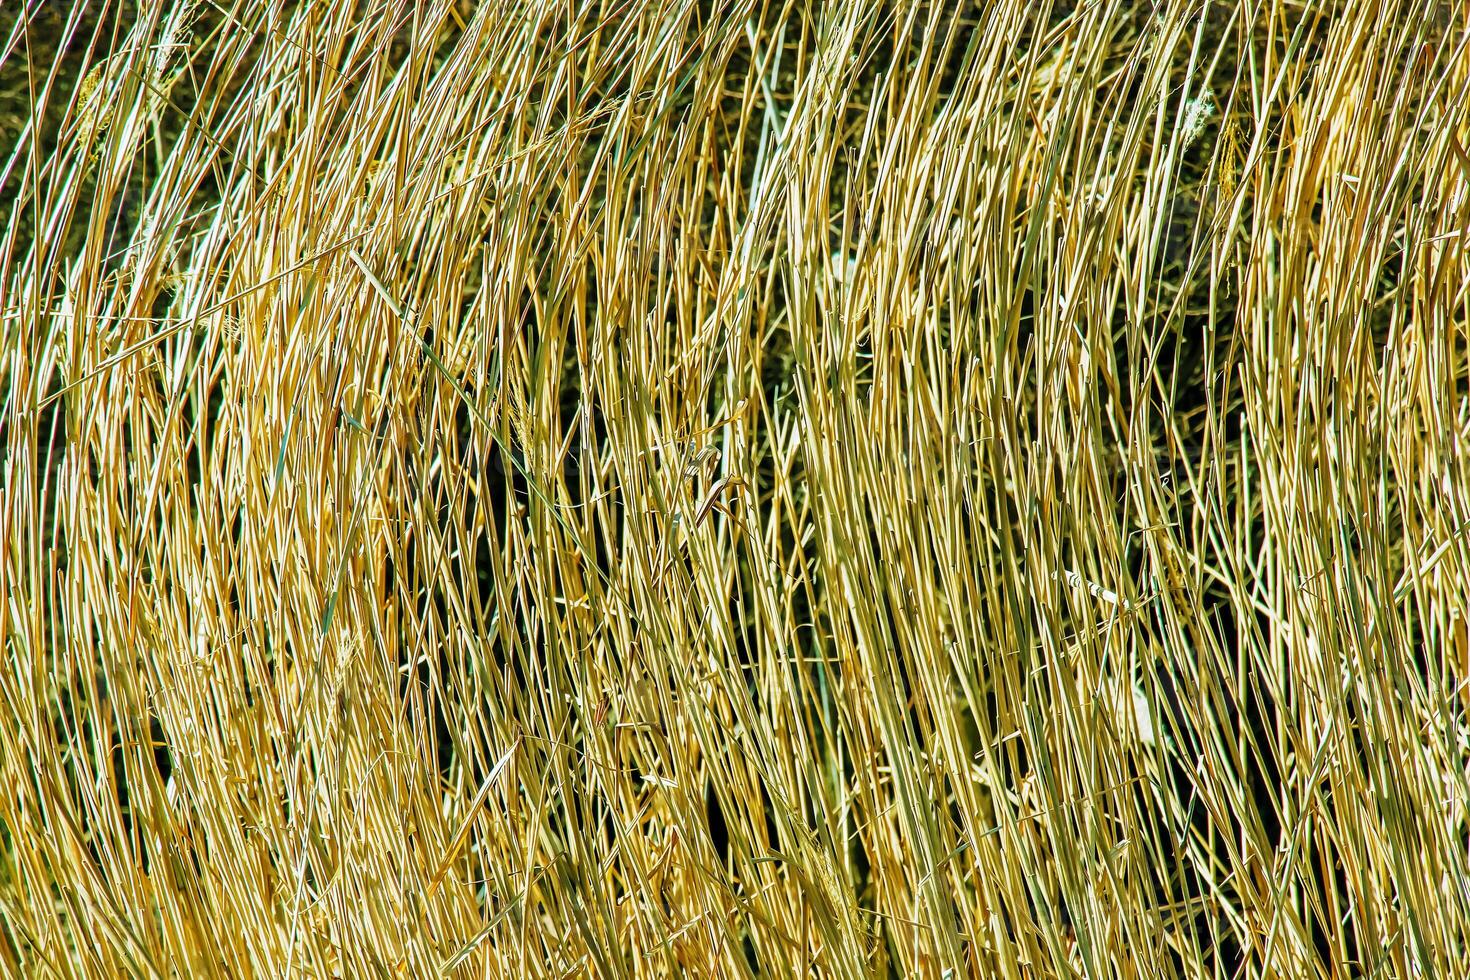 Dry grass background. Dry panicles of Miscanthus sinensis sway in the wind in early spring photo